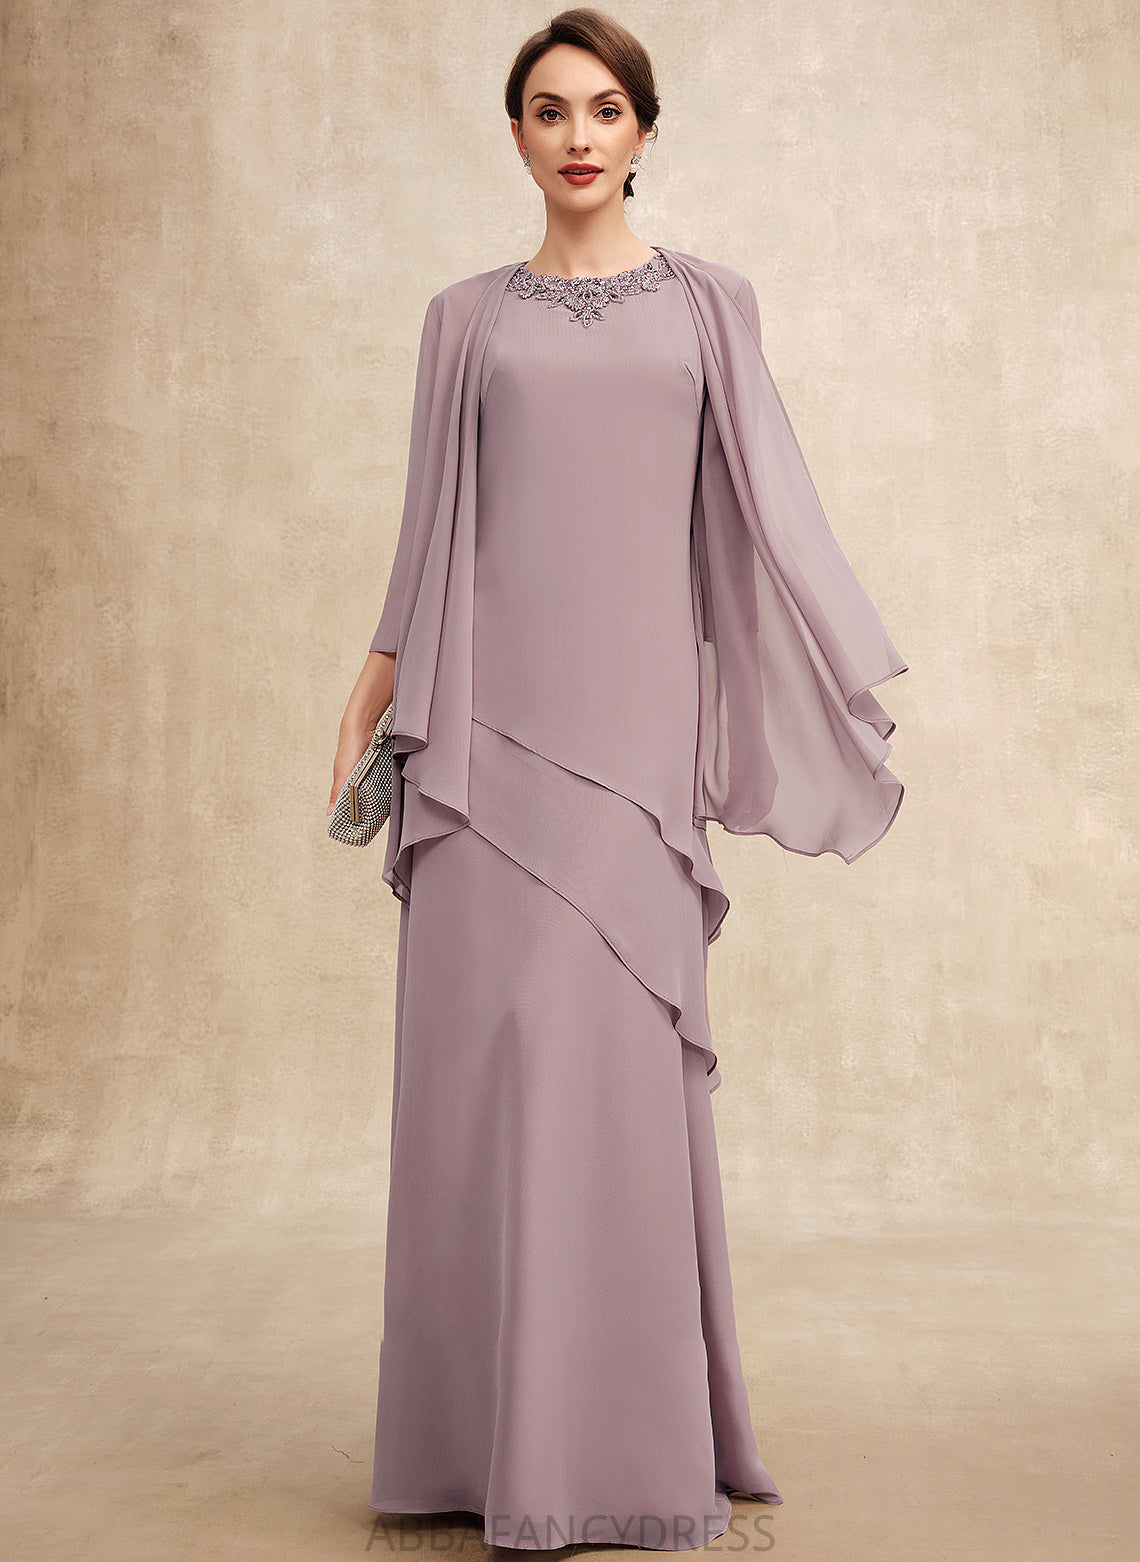 Scoop Mother of the Bride Dresses Bride Mother the Madison Neck Dress Floor-Length With of Chiffon A-Line Beading